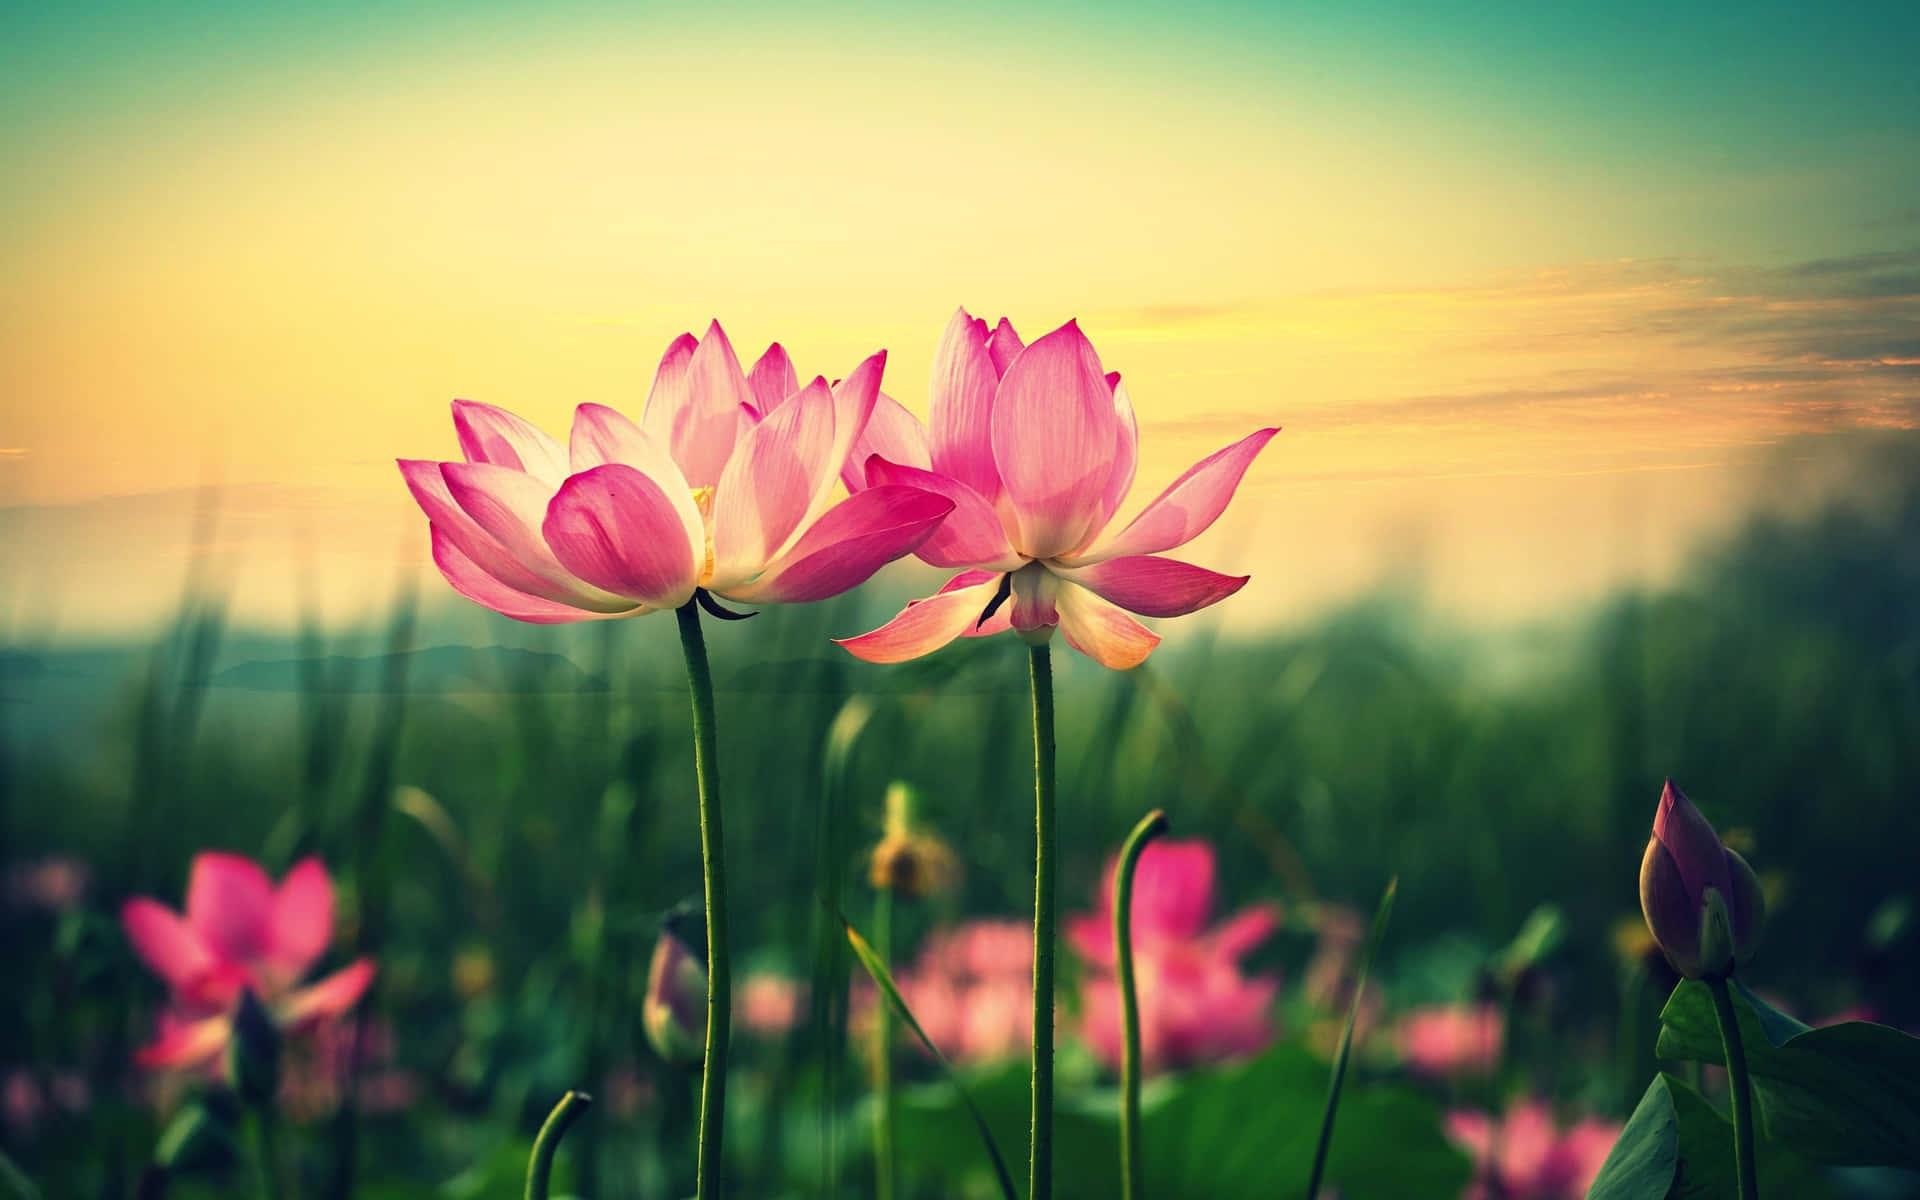 Two Pink Lotus Flowers In The Field At Sunset